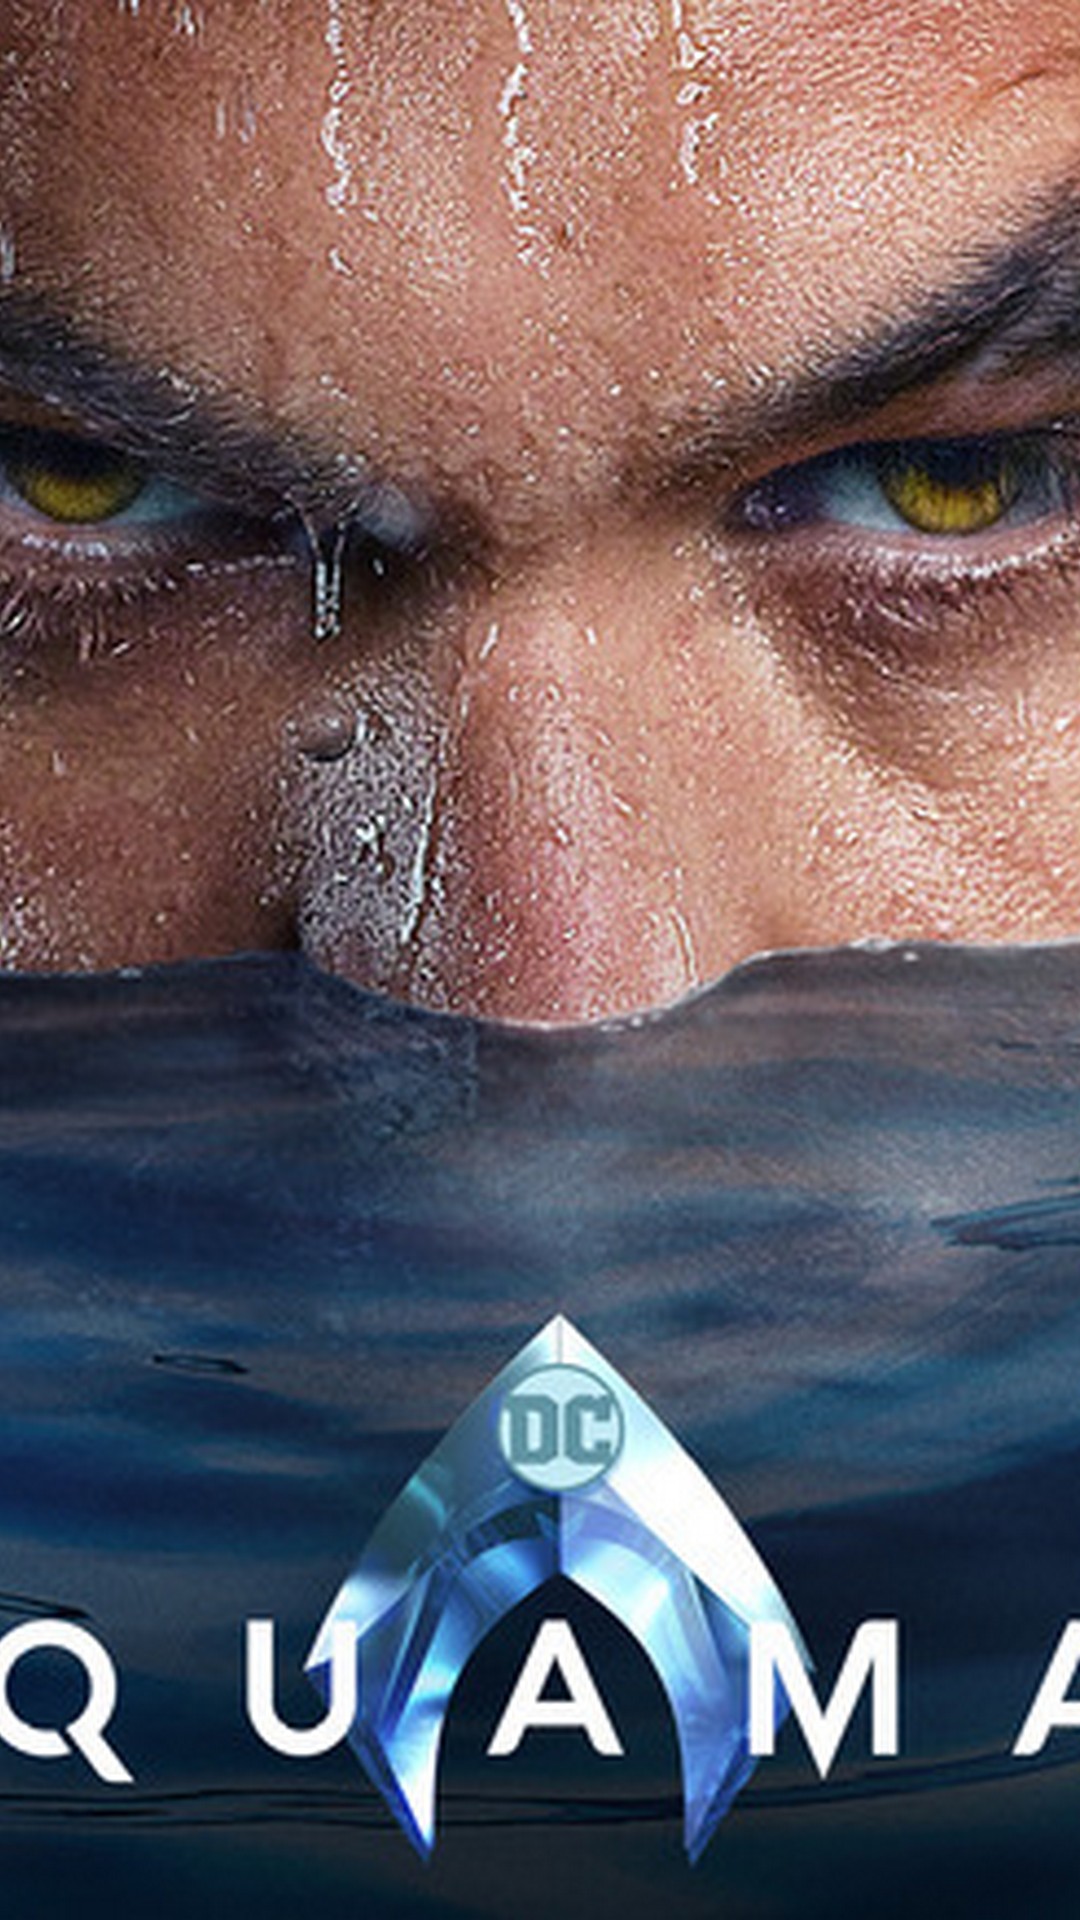 iPhone 8 Wallpaper Aquaman 2018 with image resolution 1080x1920 pixel. You can make this wallpaper for your iPhone 5, 6, 7, 8, X backgrounds, Mobile Screensaver, or iPad Lock Screen